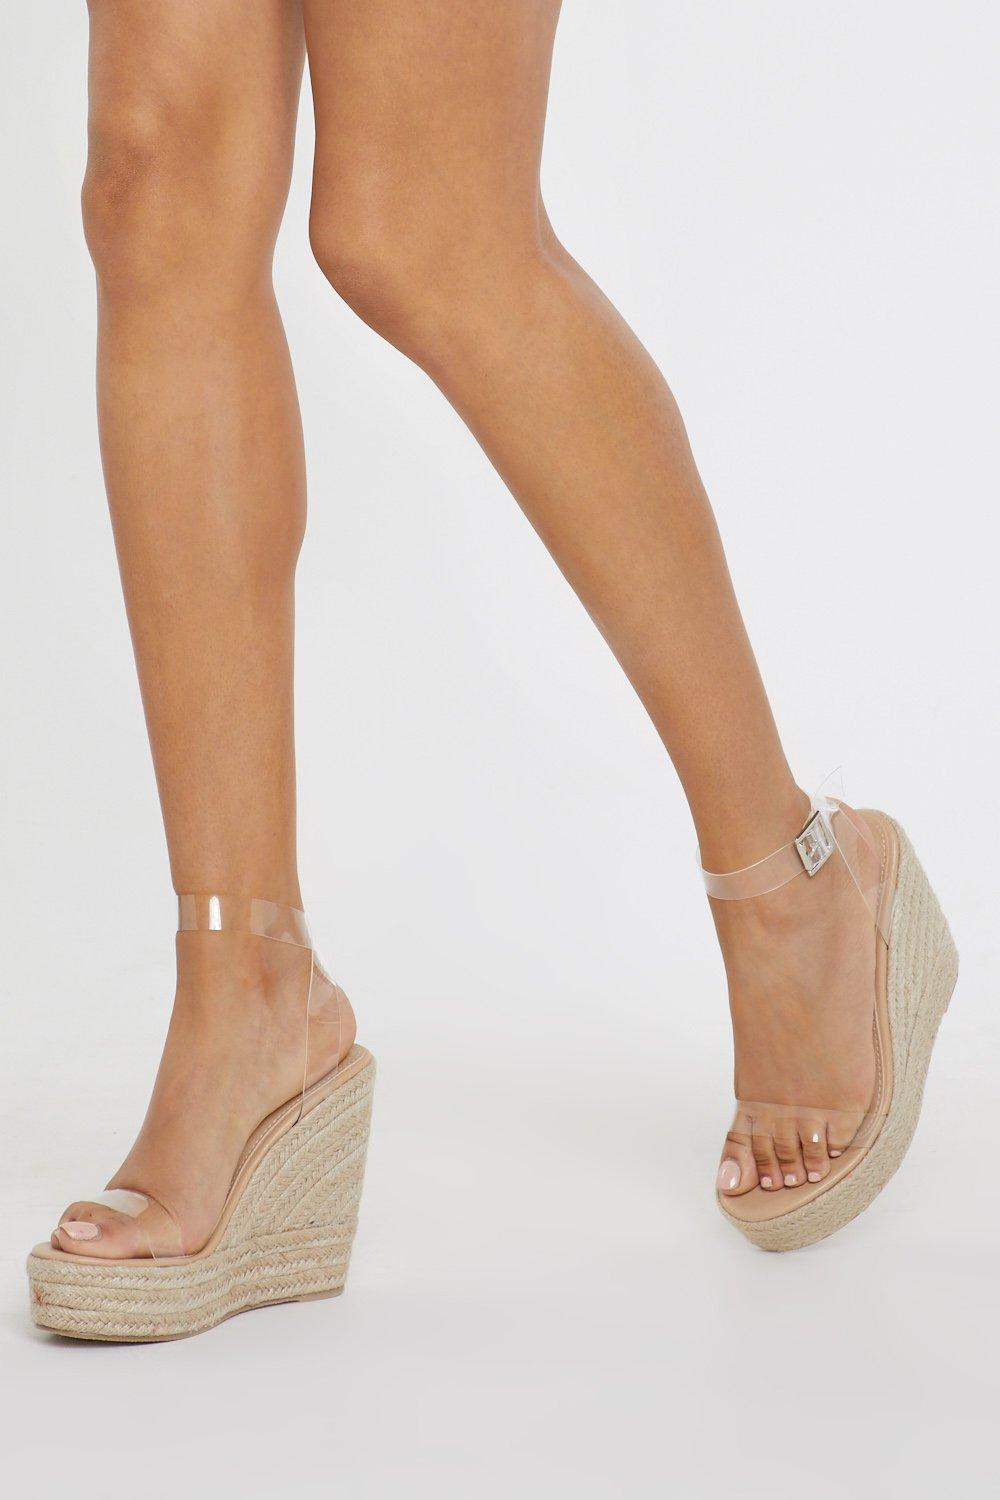 clear shoes wedges